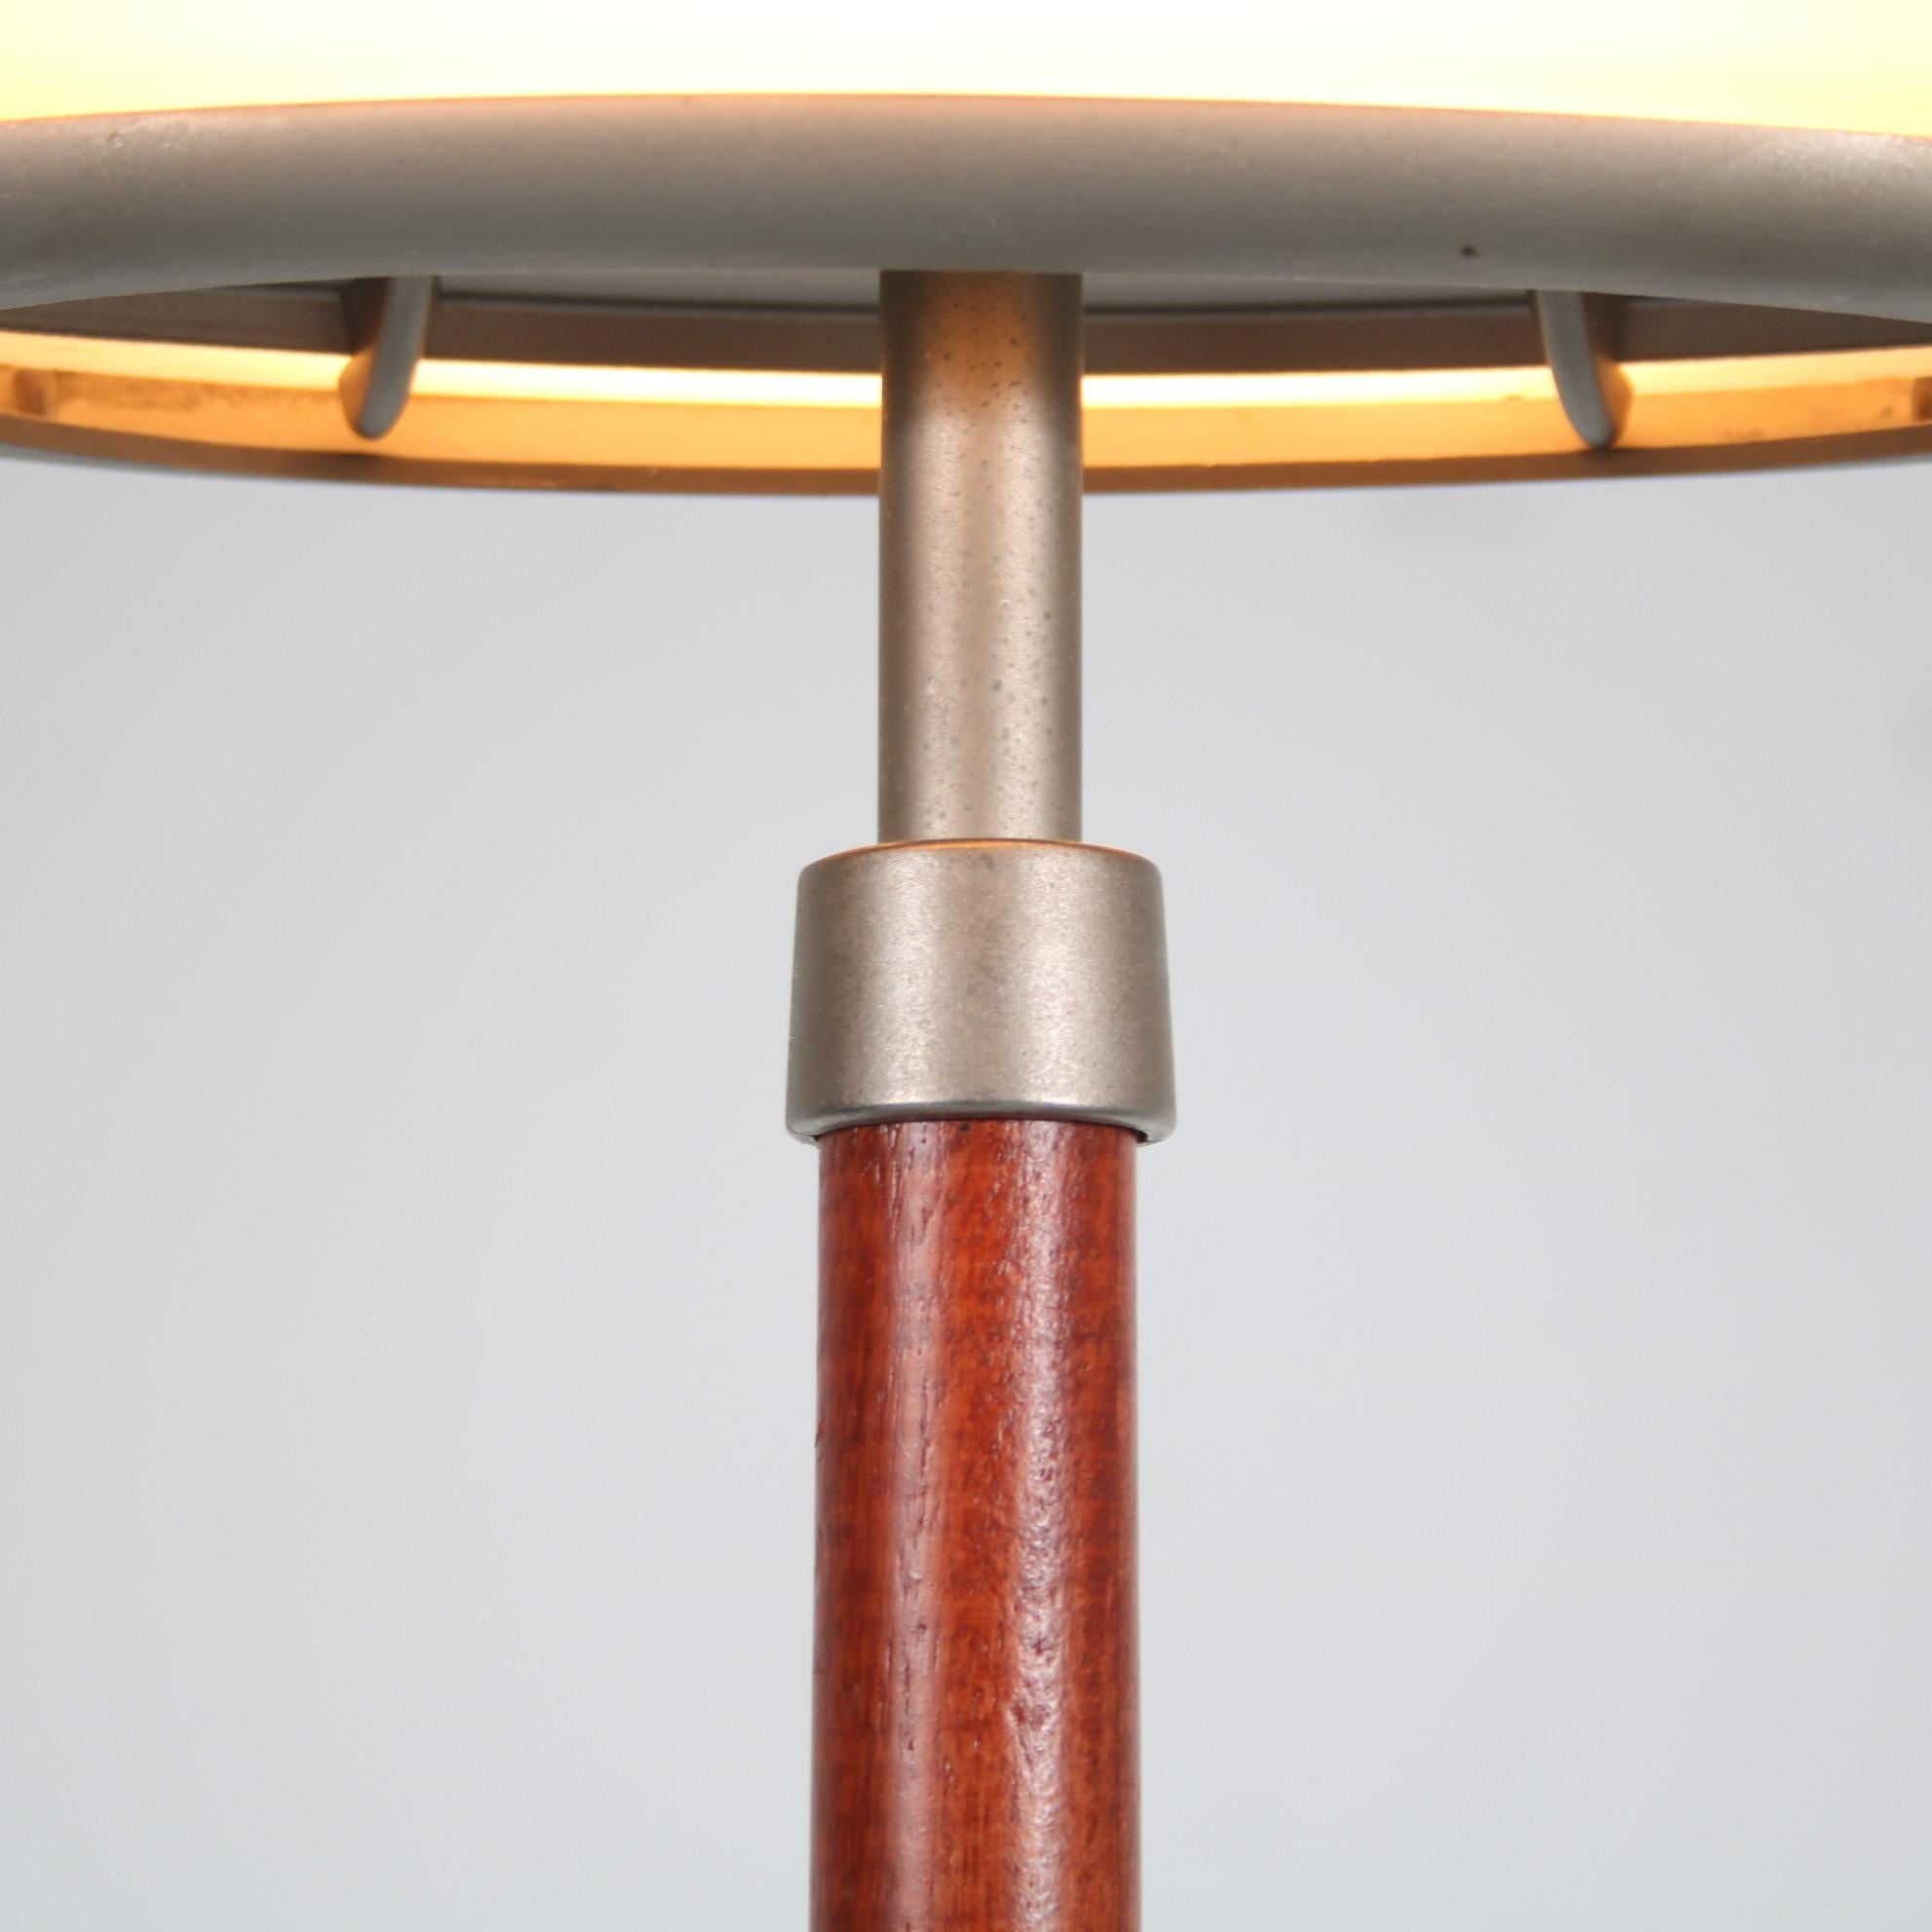 PAO Floor Lamp by Matteo Thun for Arteluce, Italy 1990 For Sale 4